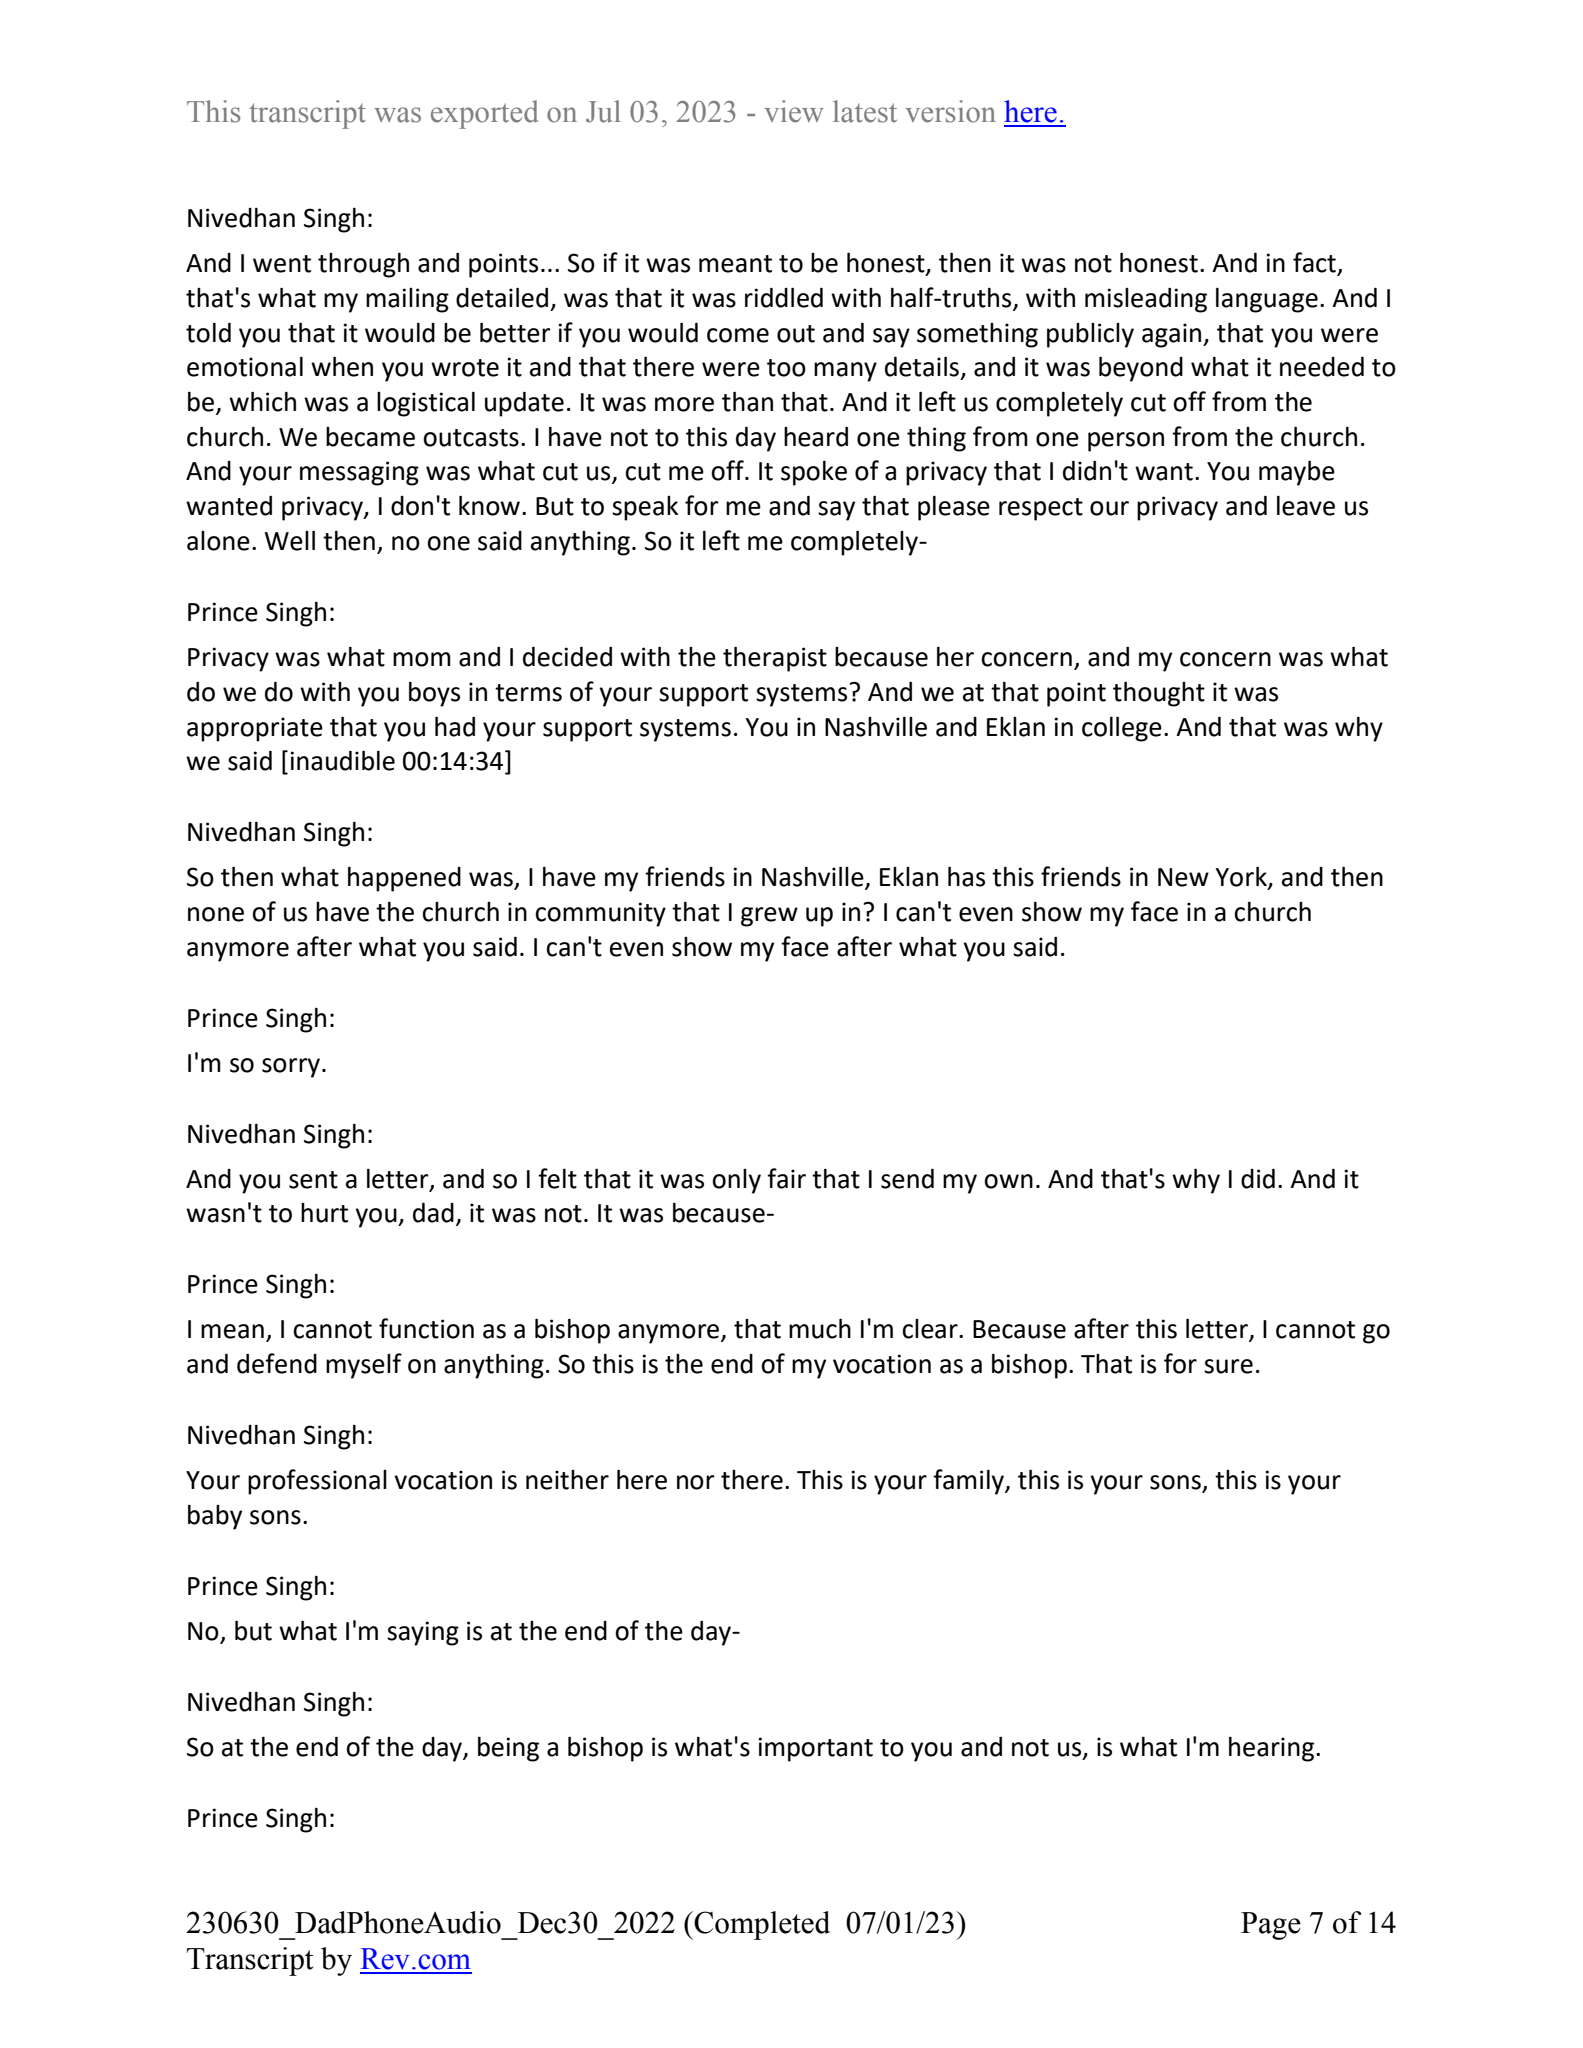 December 30th, 2022 phone call transcript - Page 7